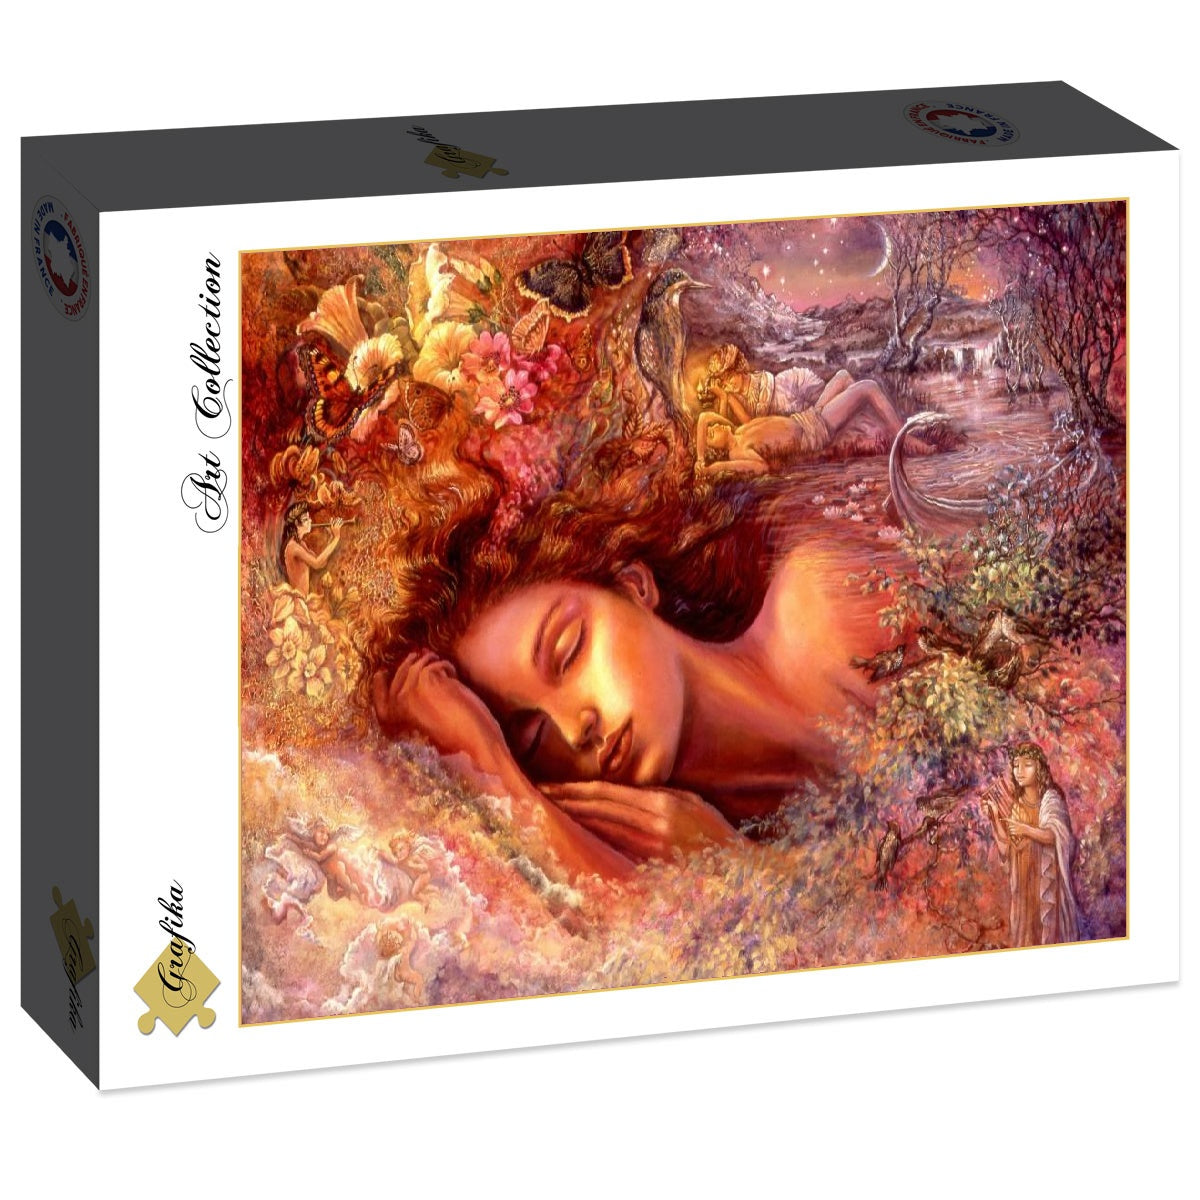 Psyche's Dreams by Josephine Wall, 1000 Piece Puzzle